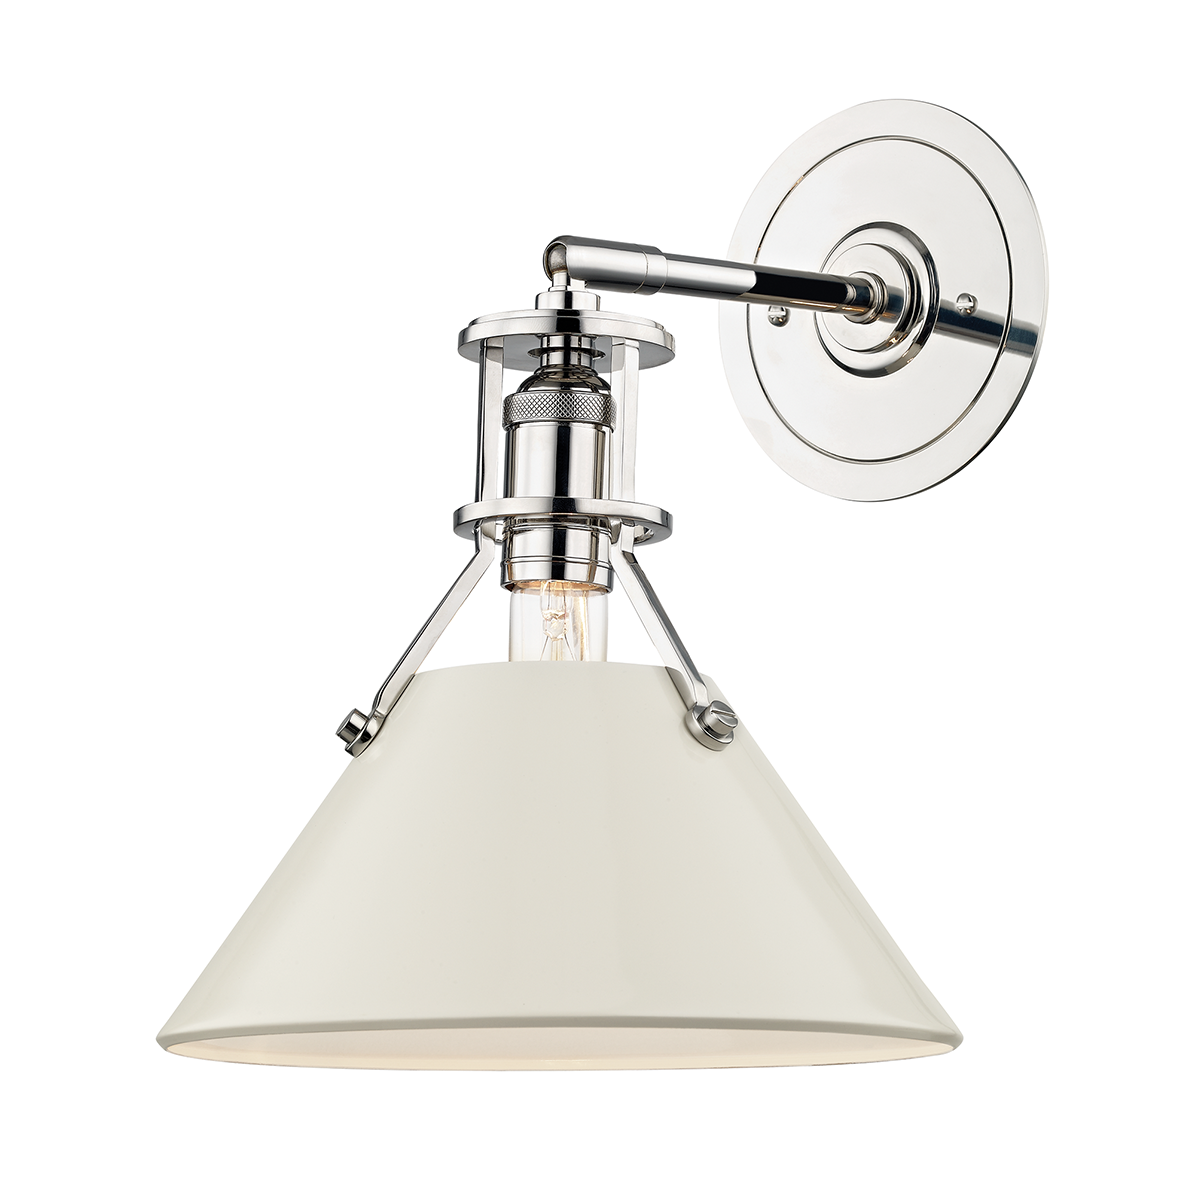 Hudson Valley Lighting MDS351-AGB/LFG Painted No.2-1 Light Pendant 9.5 Inches Wide by 9.25 Inches High Leaf Green Shade Options